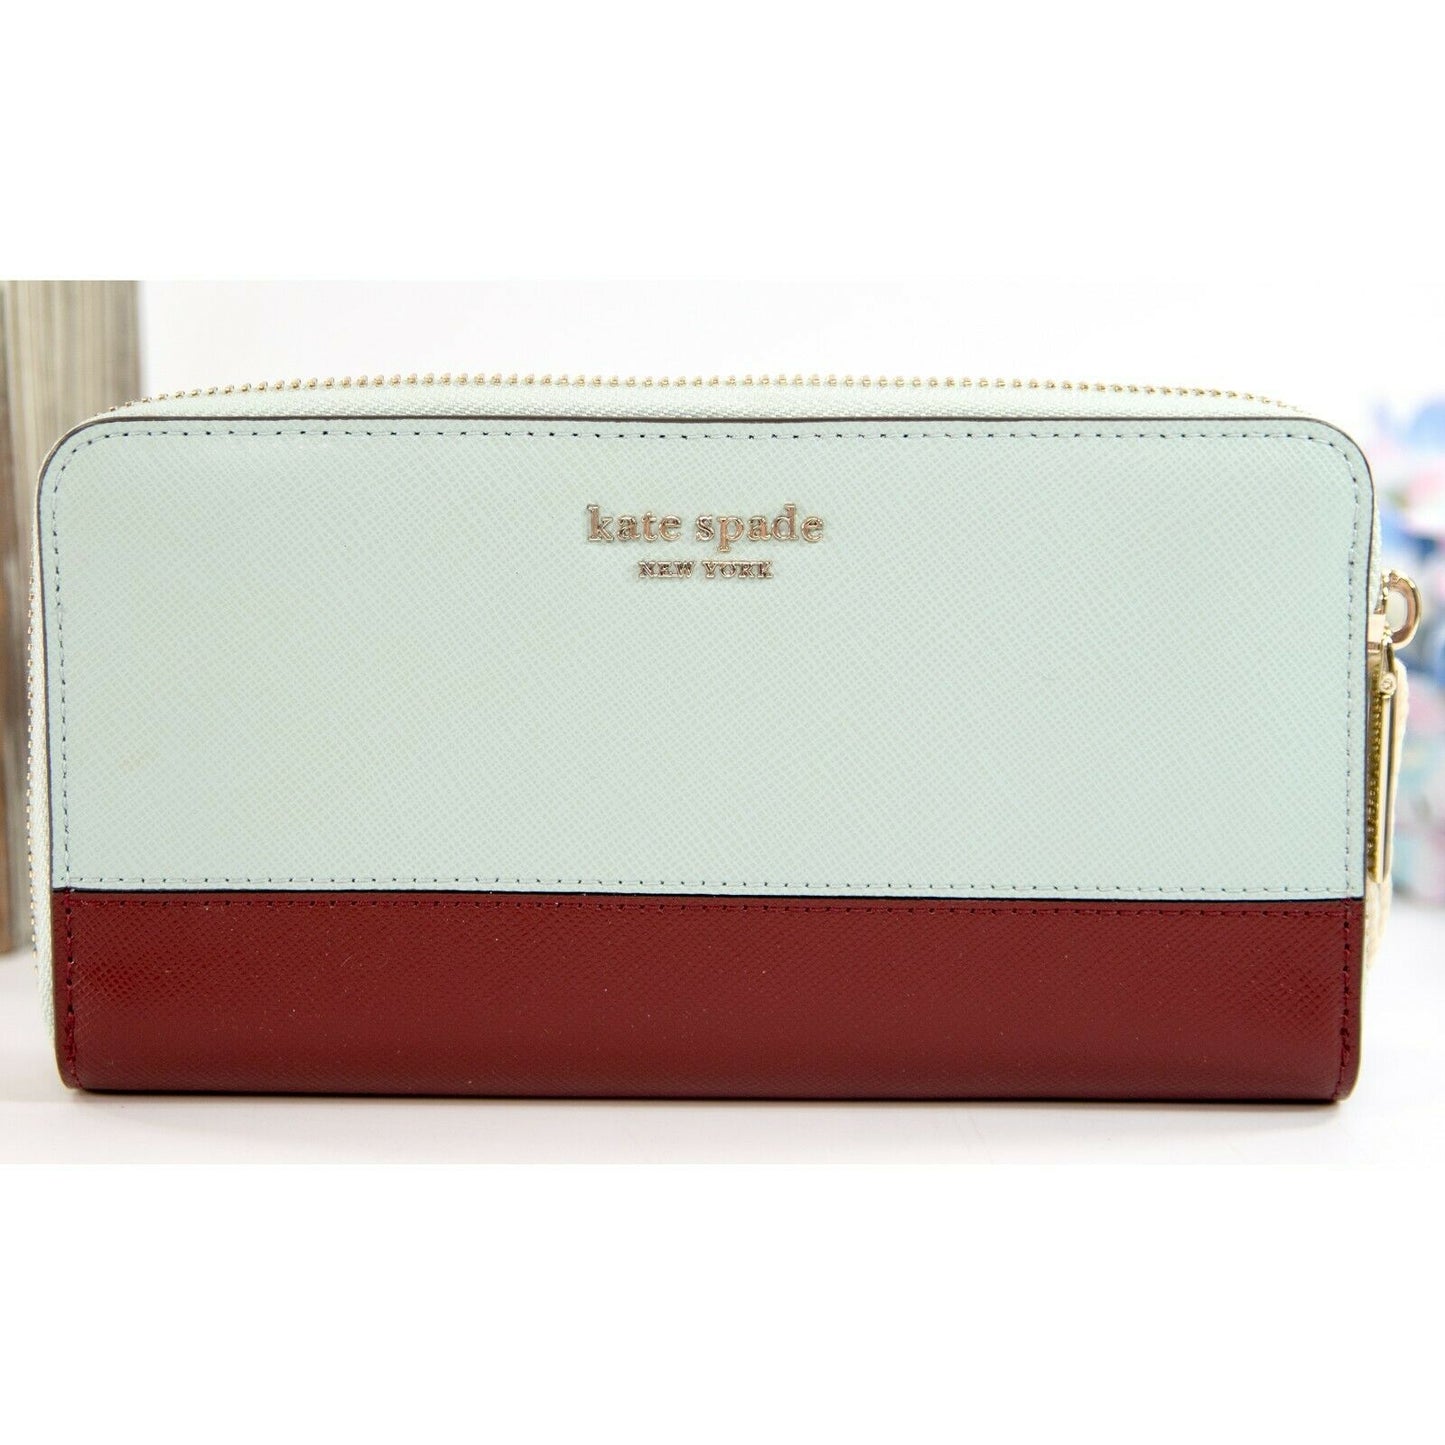 Kate Spade Cold Mist Leather Spencer Zip Around Lacey Wallet NWT